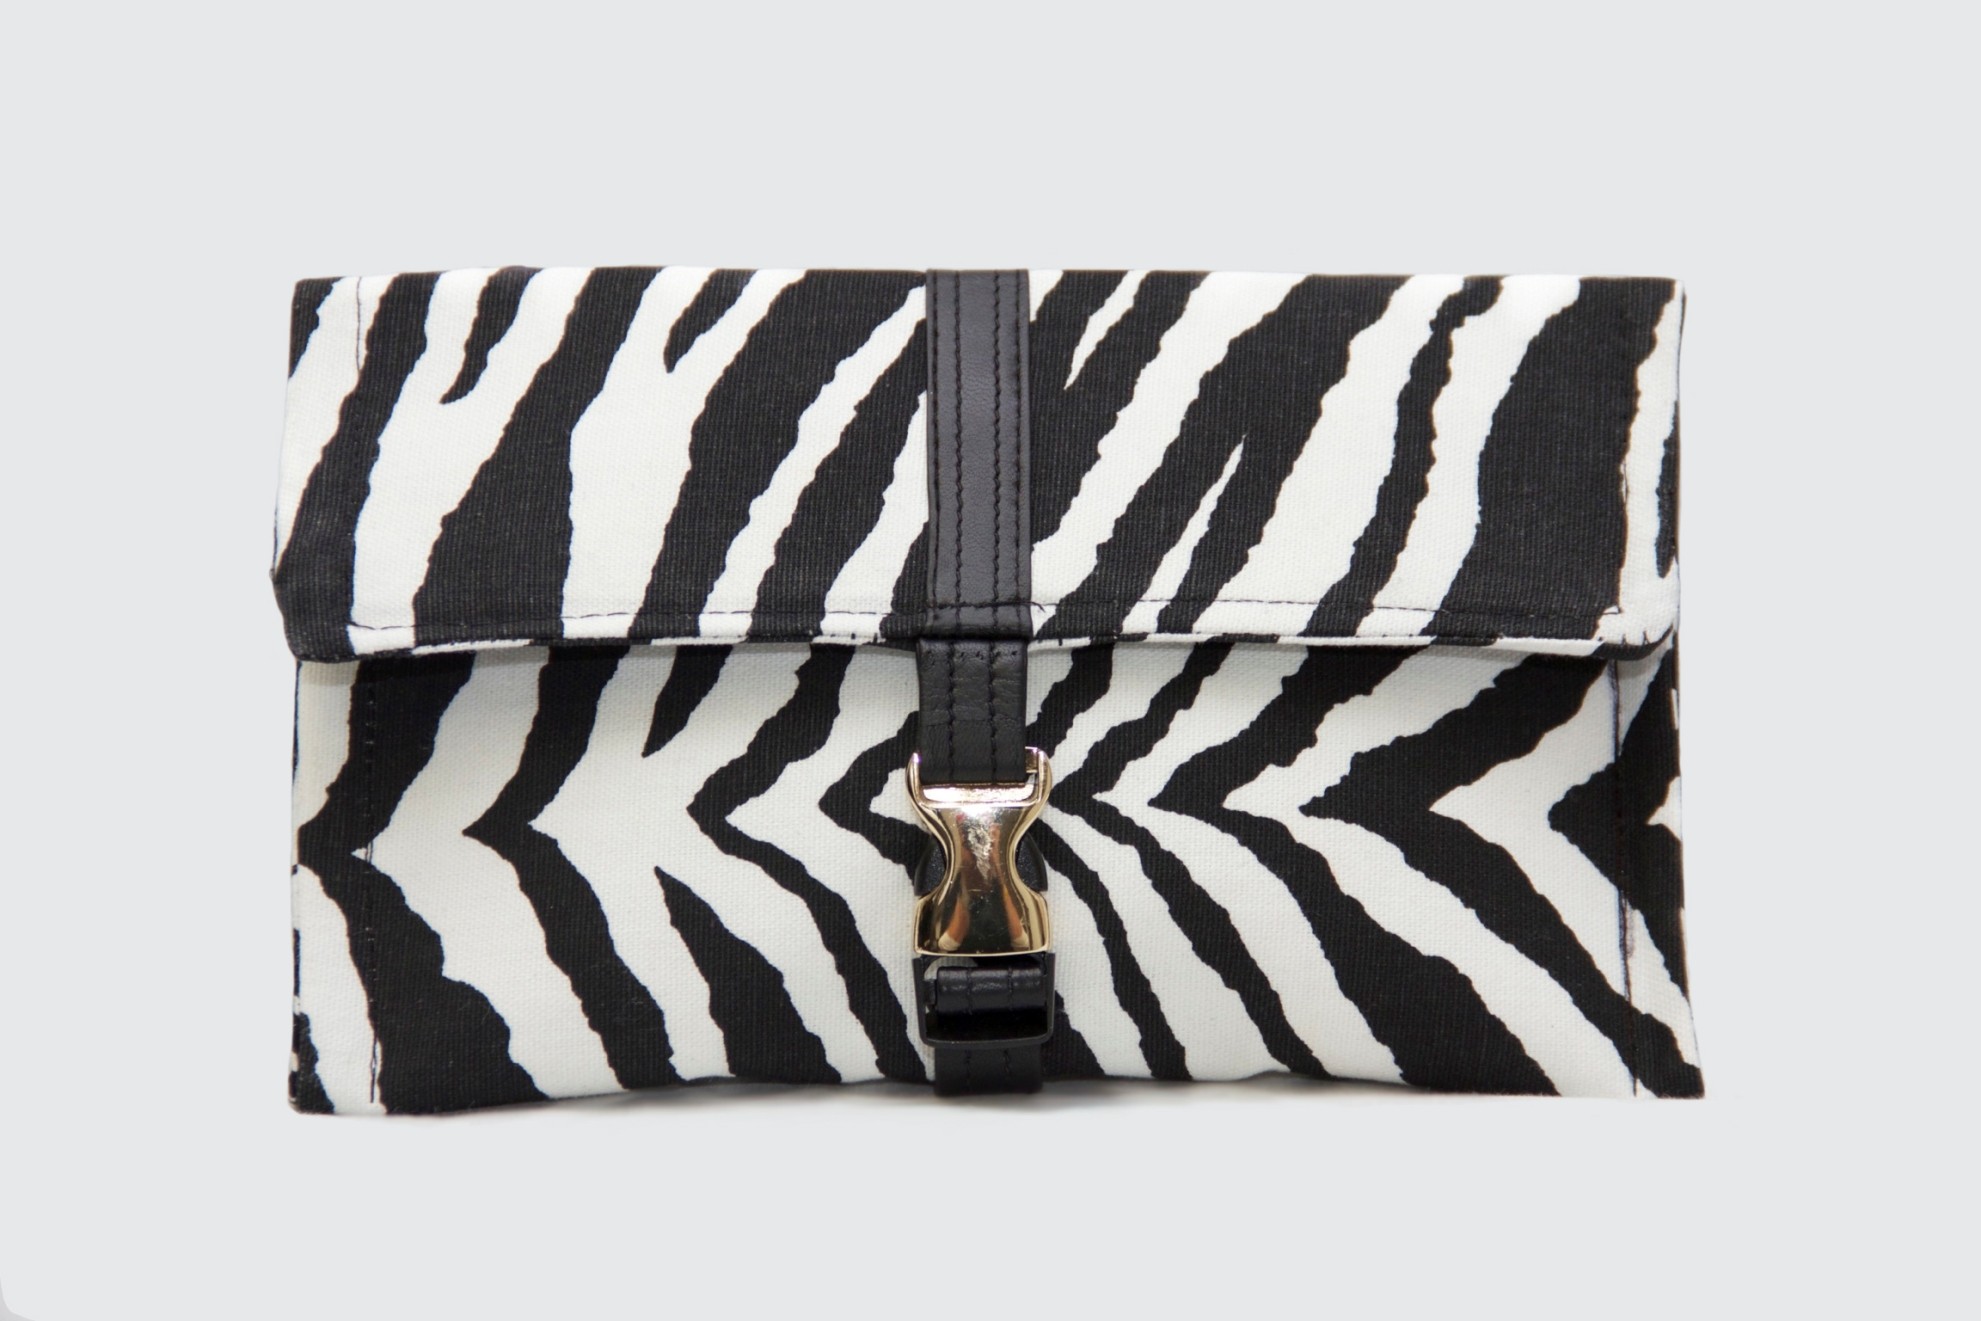 Onyx Tanzania Zebra Small Clutch from the Exotica Collection by Wilbur Pack Jr.